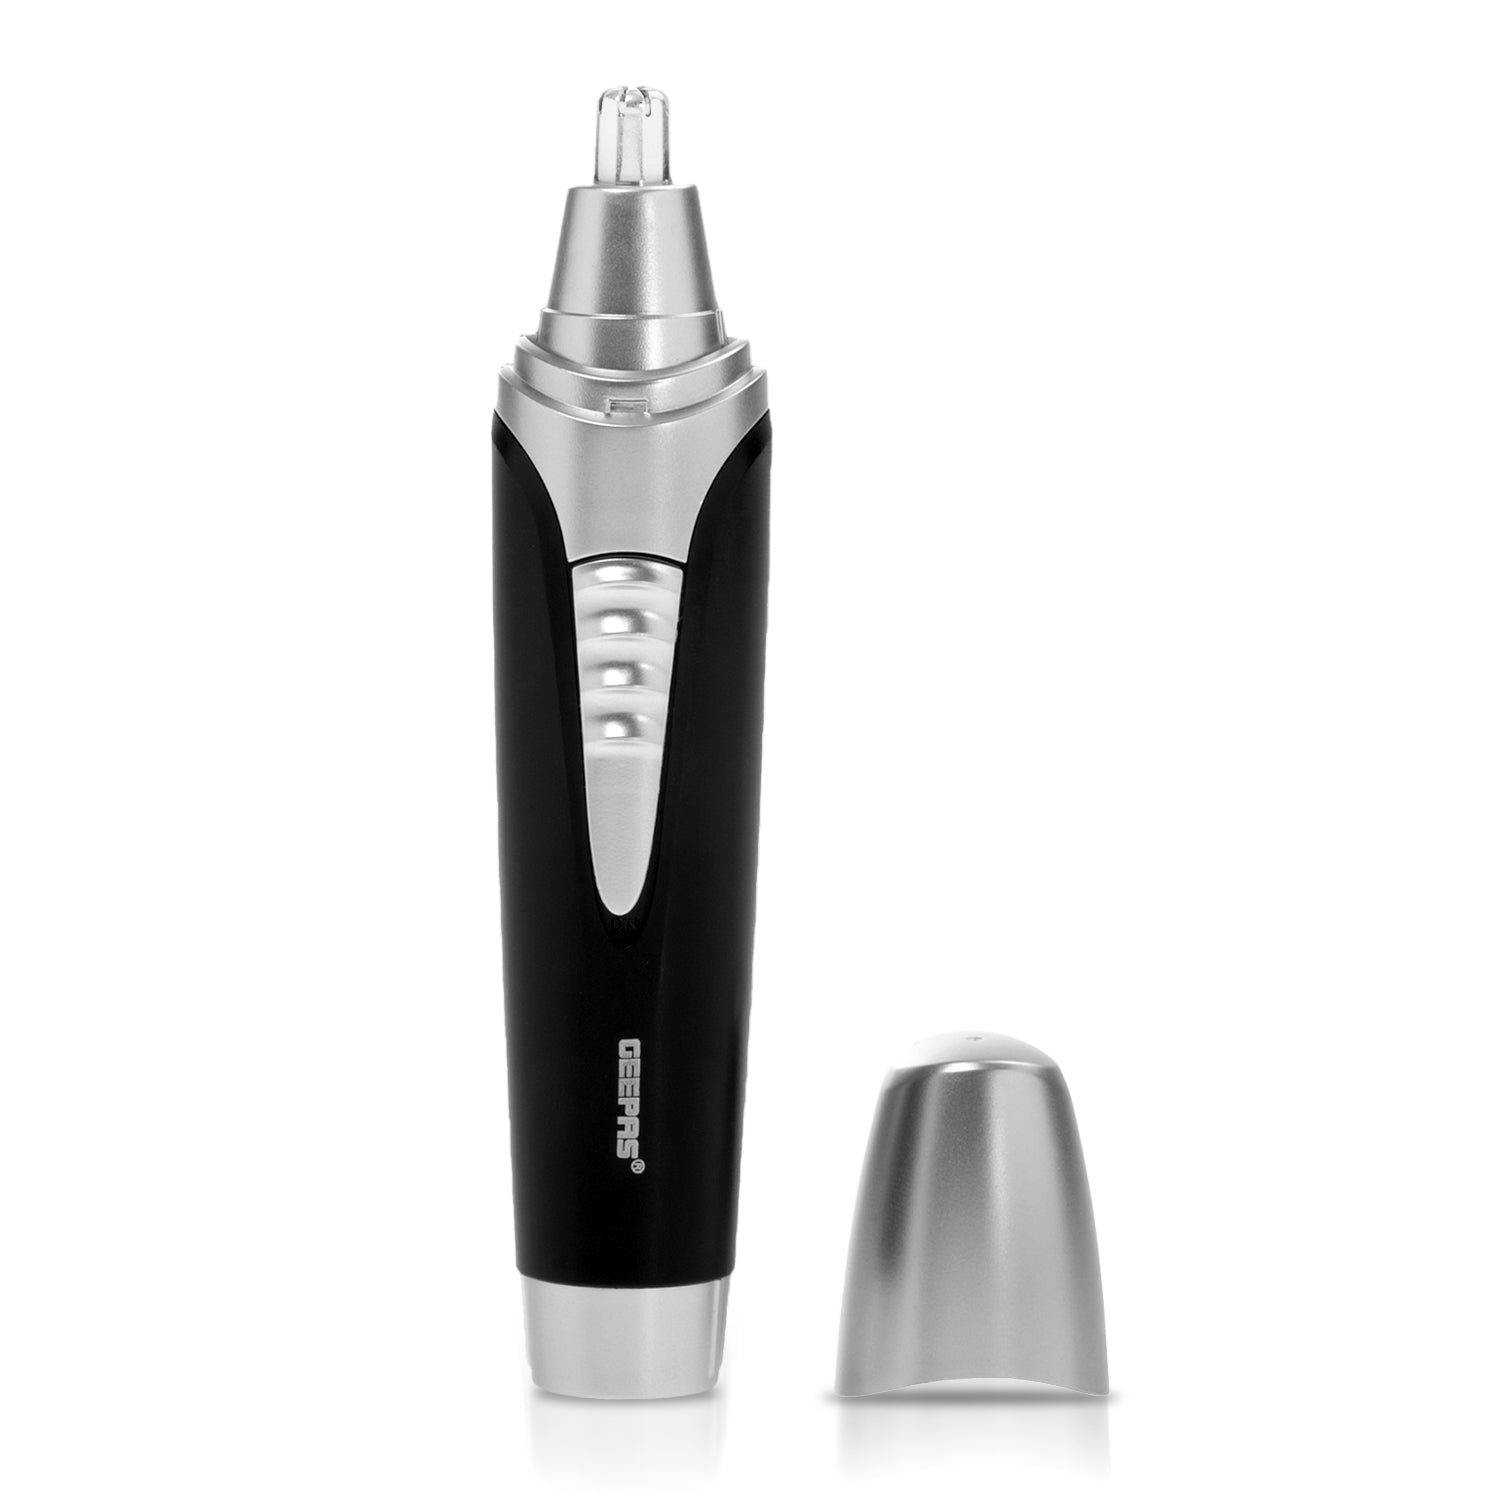 The image shows off the portable geepas nose and ear hair trimmer, part of the men's grooming set. The trimmer is stood up on a clear white back ground with the protective lid taken off and placed besides it.